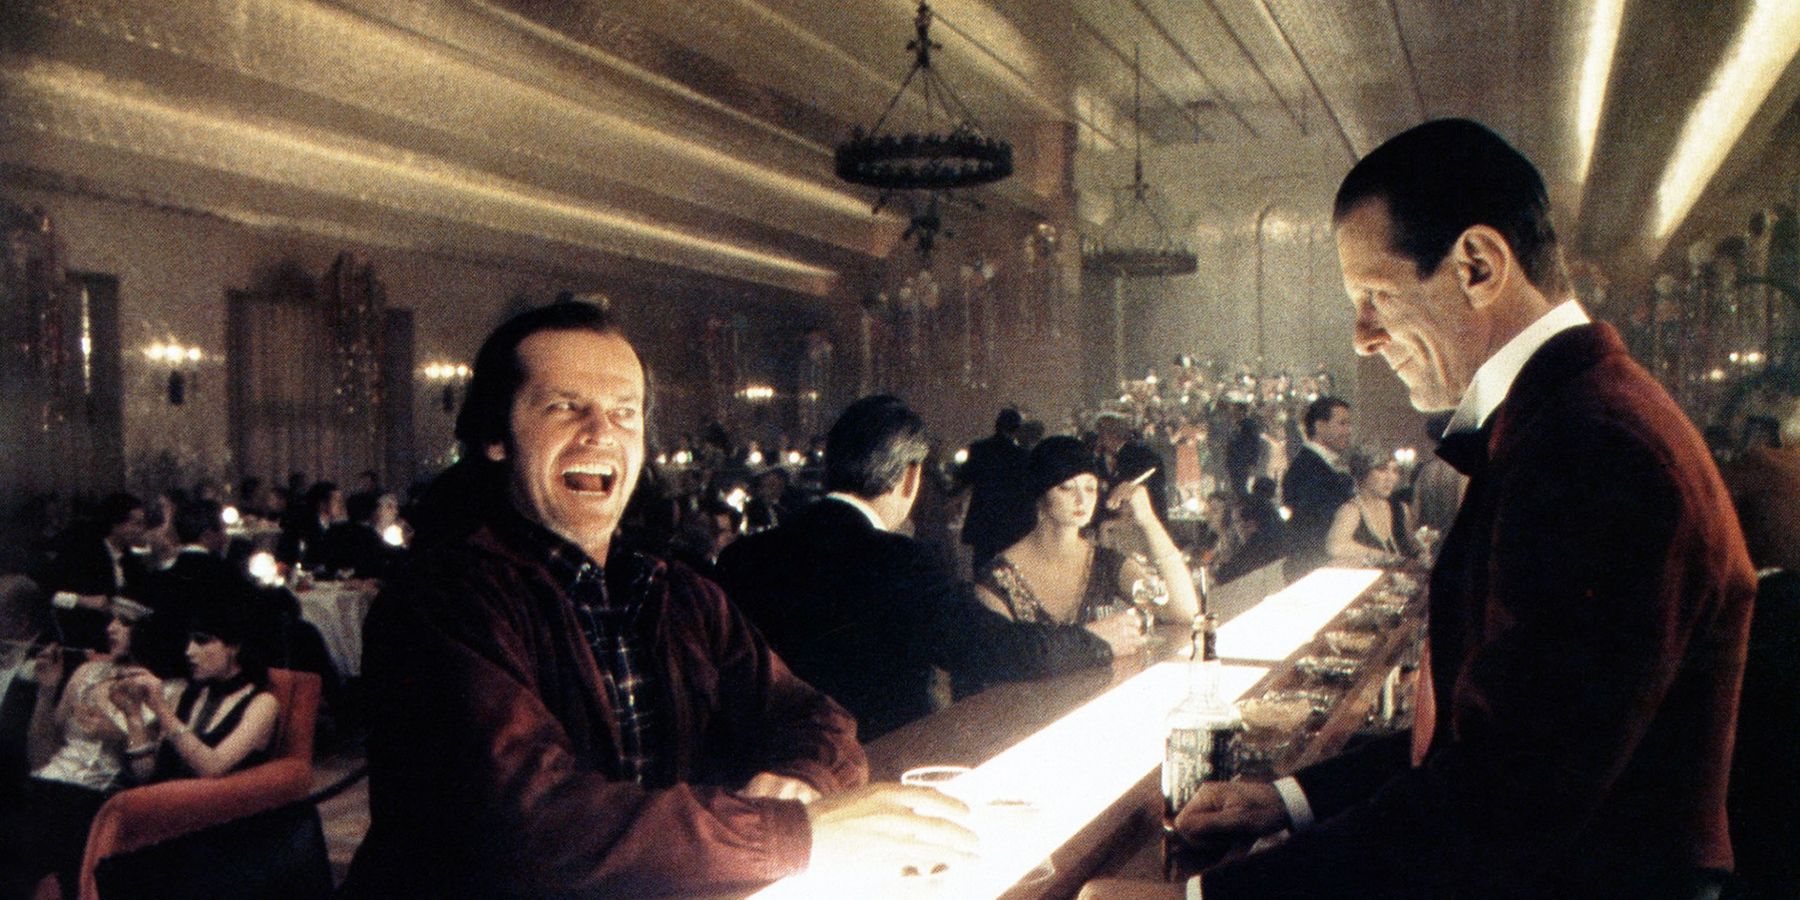 Jack talking to Lloyd at the bar during the party scene from the Shining